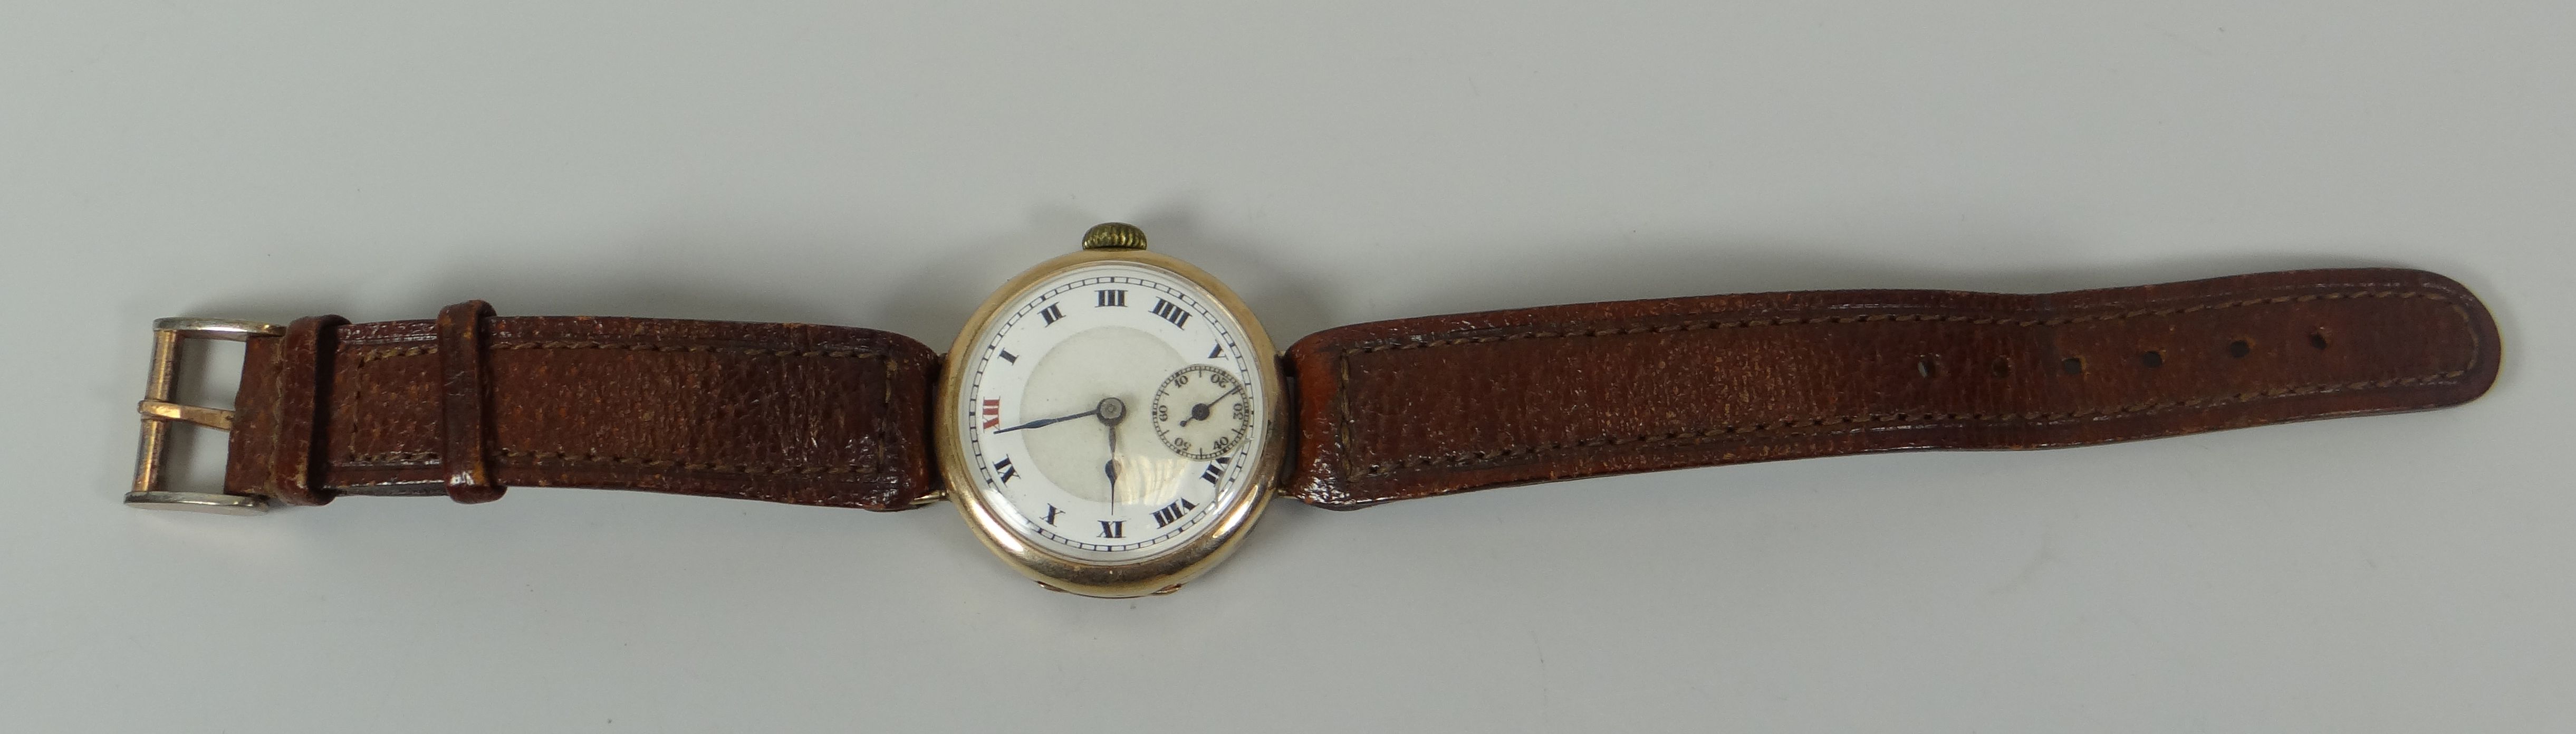 A VINTAGE 9CT GOLD ENCASED WRISTWATCH on later tan leather strap, the dial with Roman numerals and